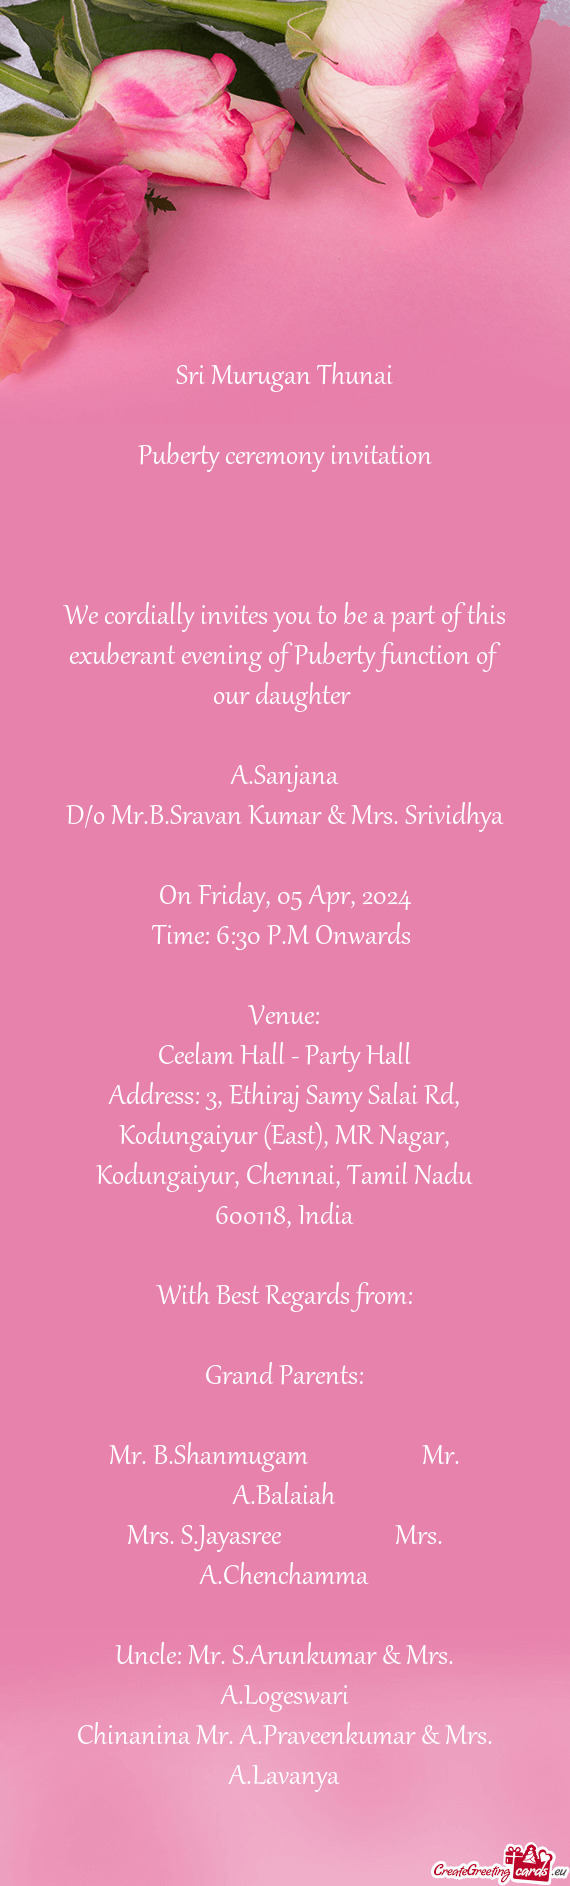 We cordially invites you to be a part of this exuberant evening of Puberty function of our daughter